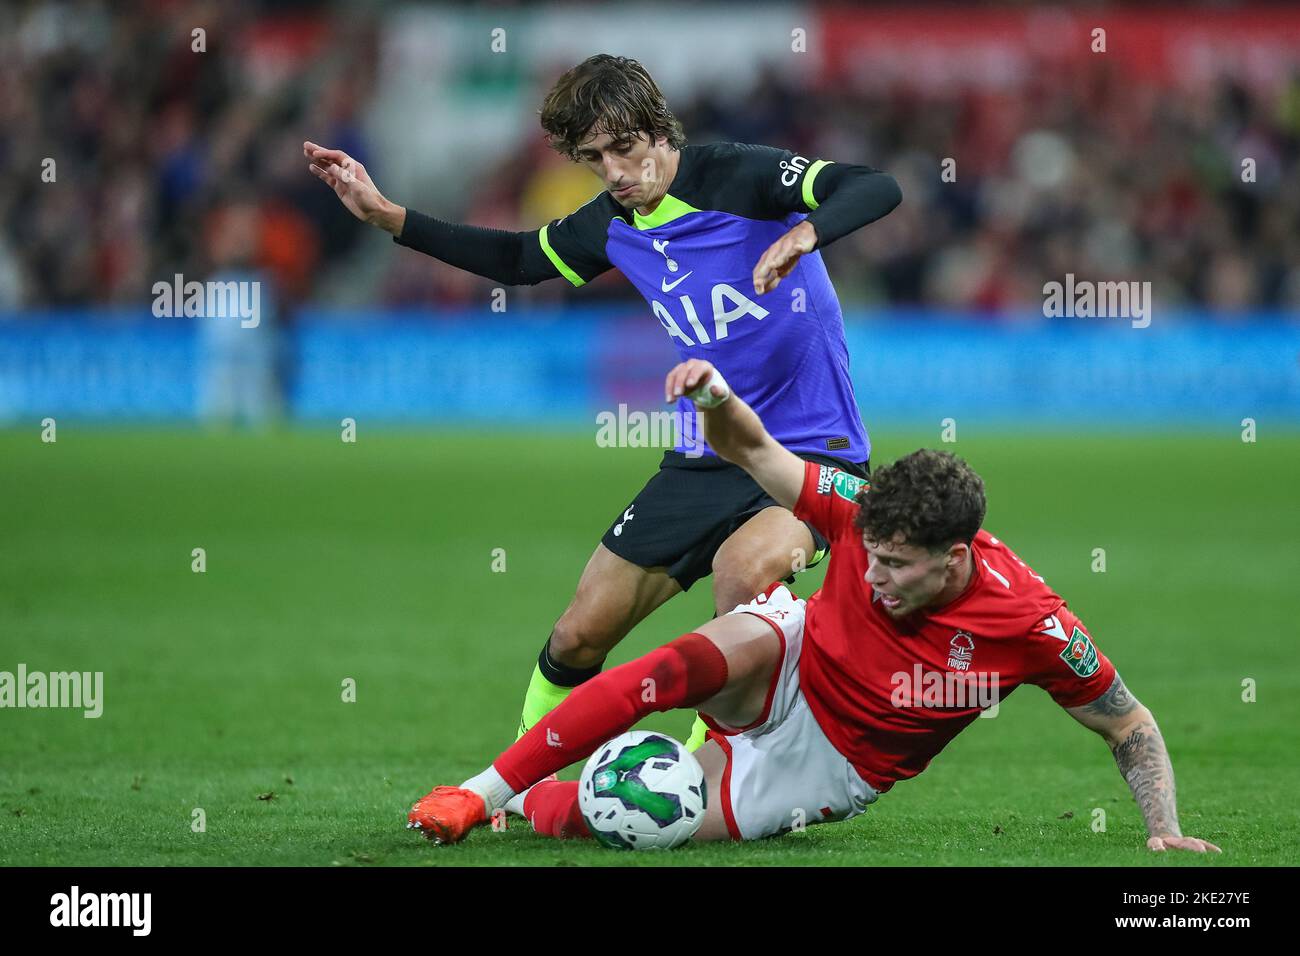 Bryan Gil #11 of Tottenham Hotspur and Neco Williams #7 of Nottingham Forest battle for the ball during the Carabao Cup Third Round match Nottingham Forest vs Tottenham Hotspur at City Ground, Nottingham, United Kingdom, 9th November 2022  (Photo by Gareth Evans/News Images) Stock Photo